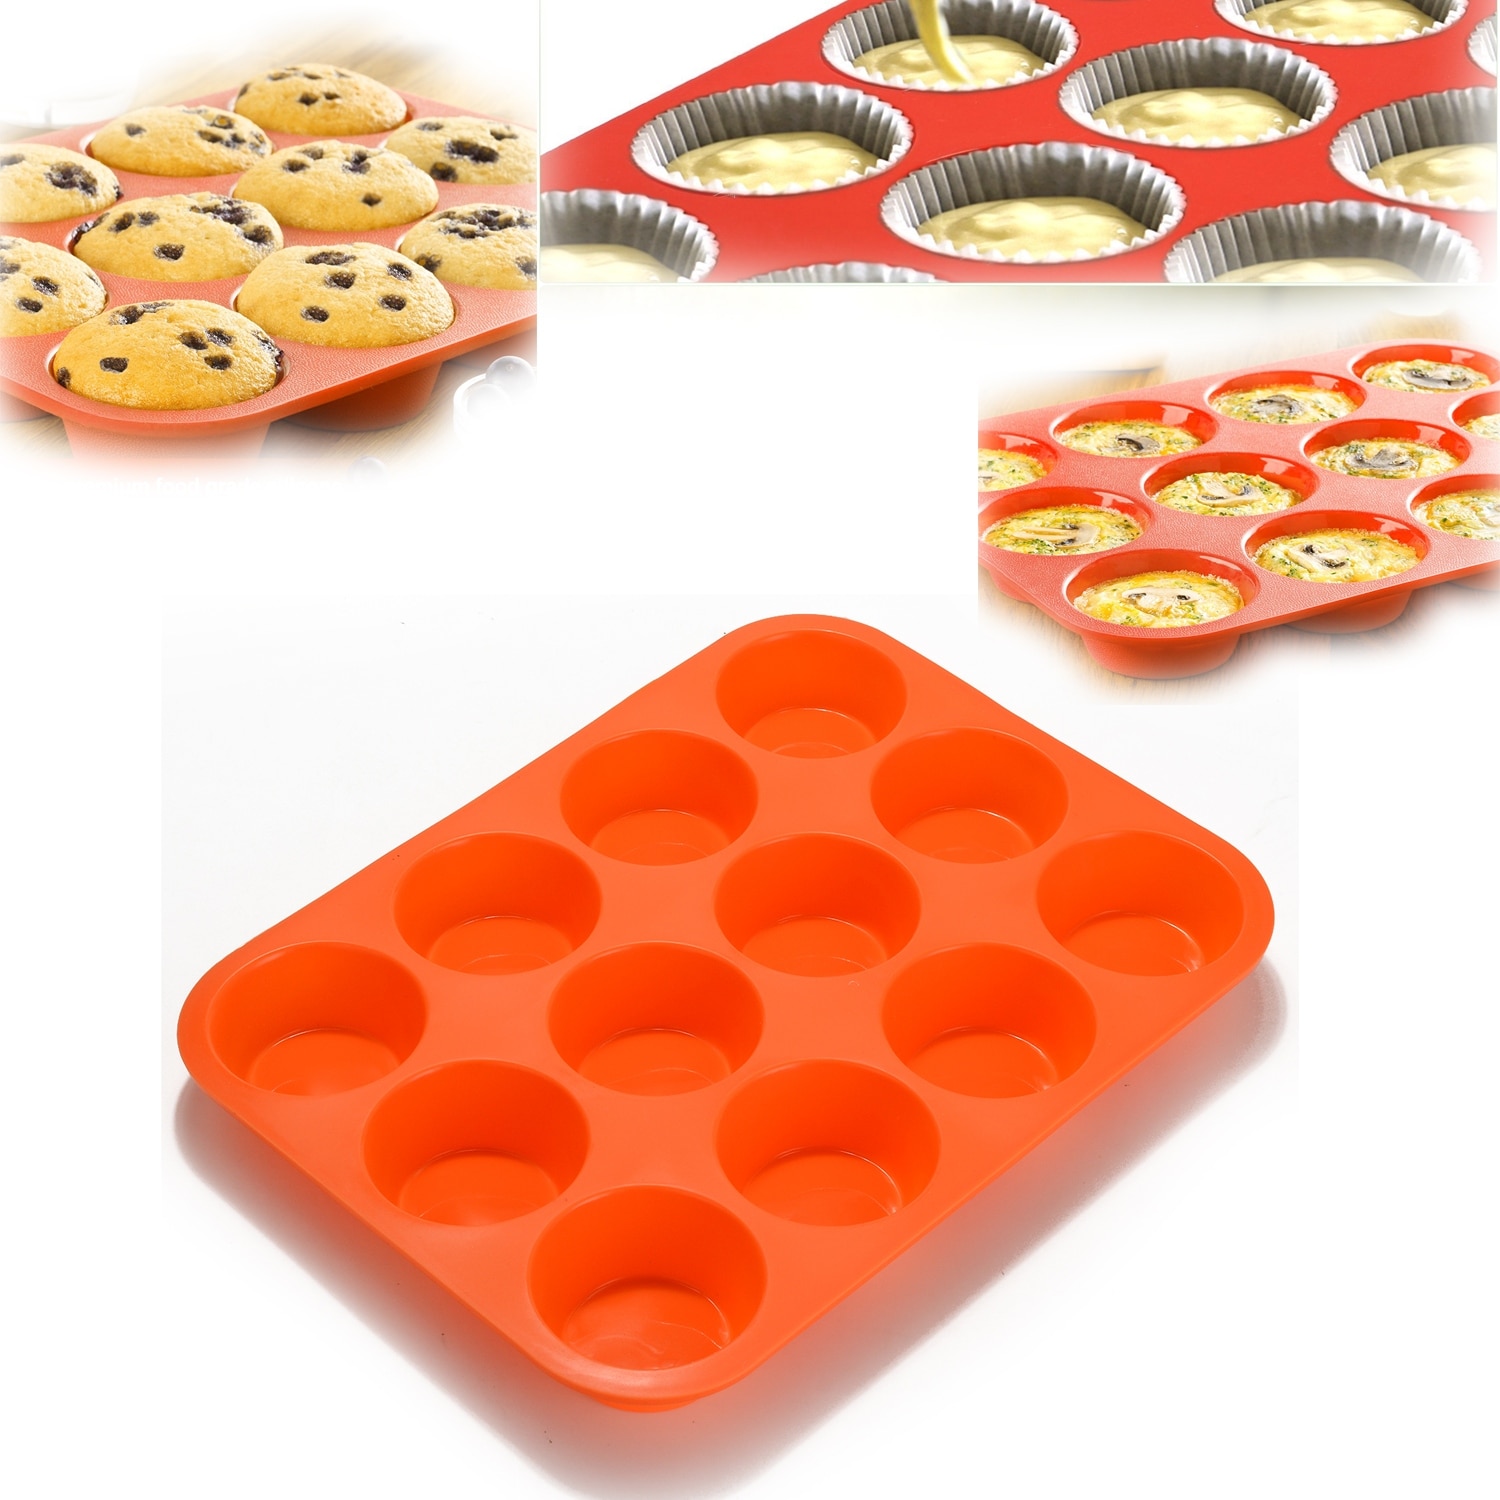 https://ak1.ostkcdn.com/images/products/is/images/direct/afe0437dd3796b915cf969149ee444297e151e71/12-Cup-Silicone-Muffin-Pan-for-Baking-BPA-Free.jpg